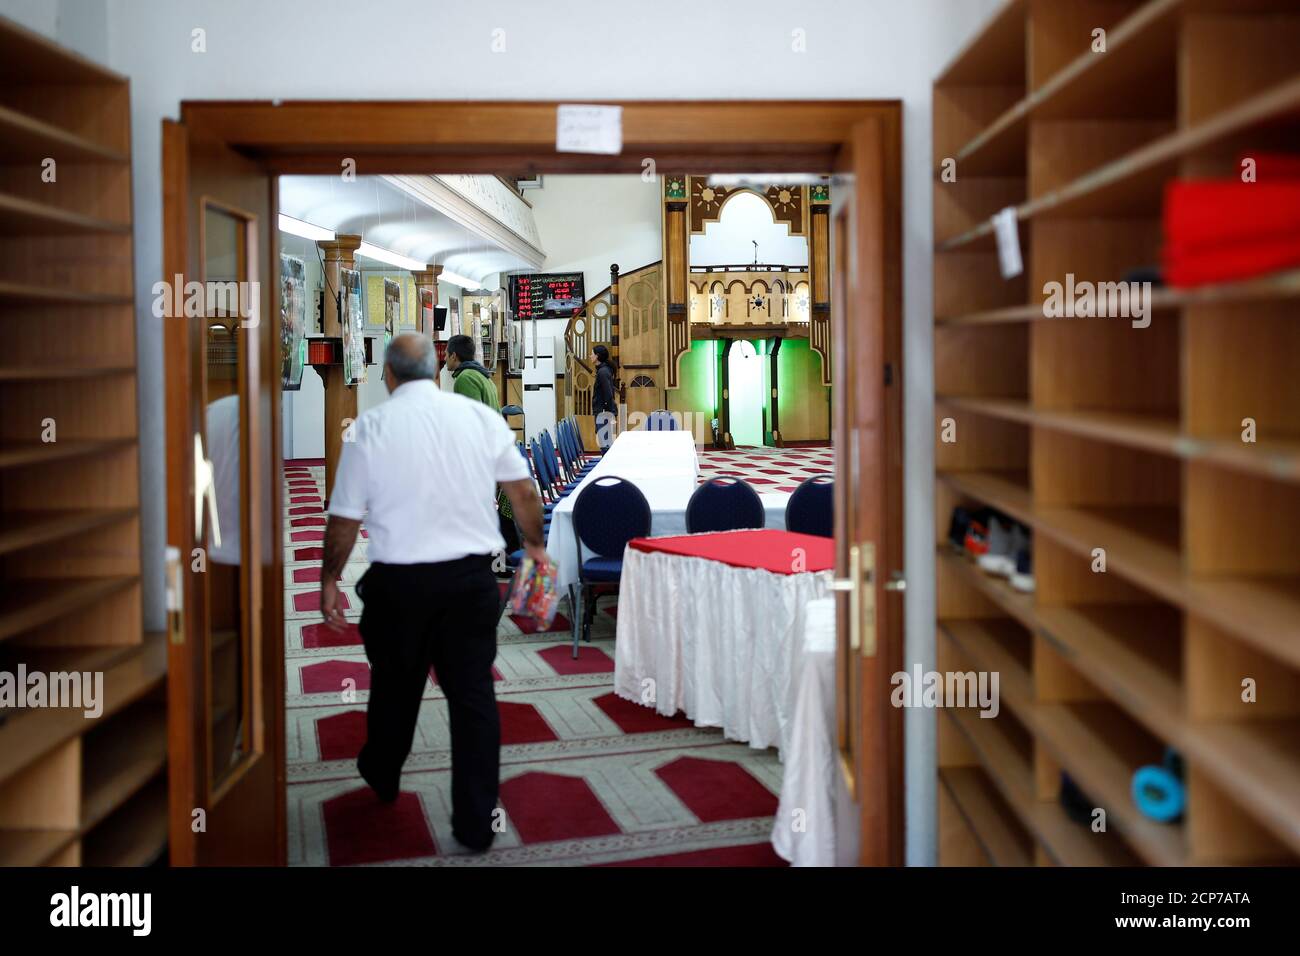 Interior view of the Dar al Salam Mosque, managed by NBS-Neukoellner Begegnungsstaette e.V. in Berlin, Germany October 3, 2017.   REUTERS/Axel Schmidt Stock Photo